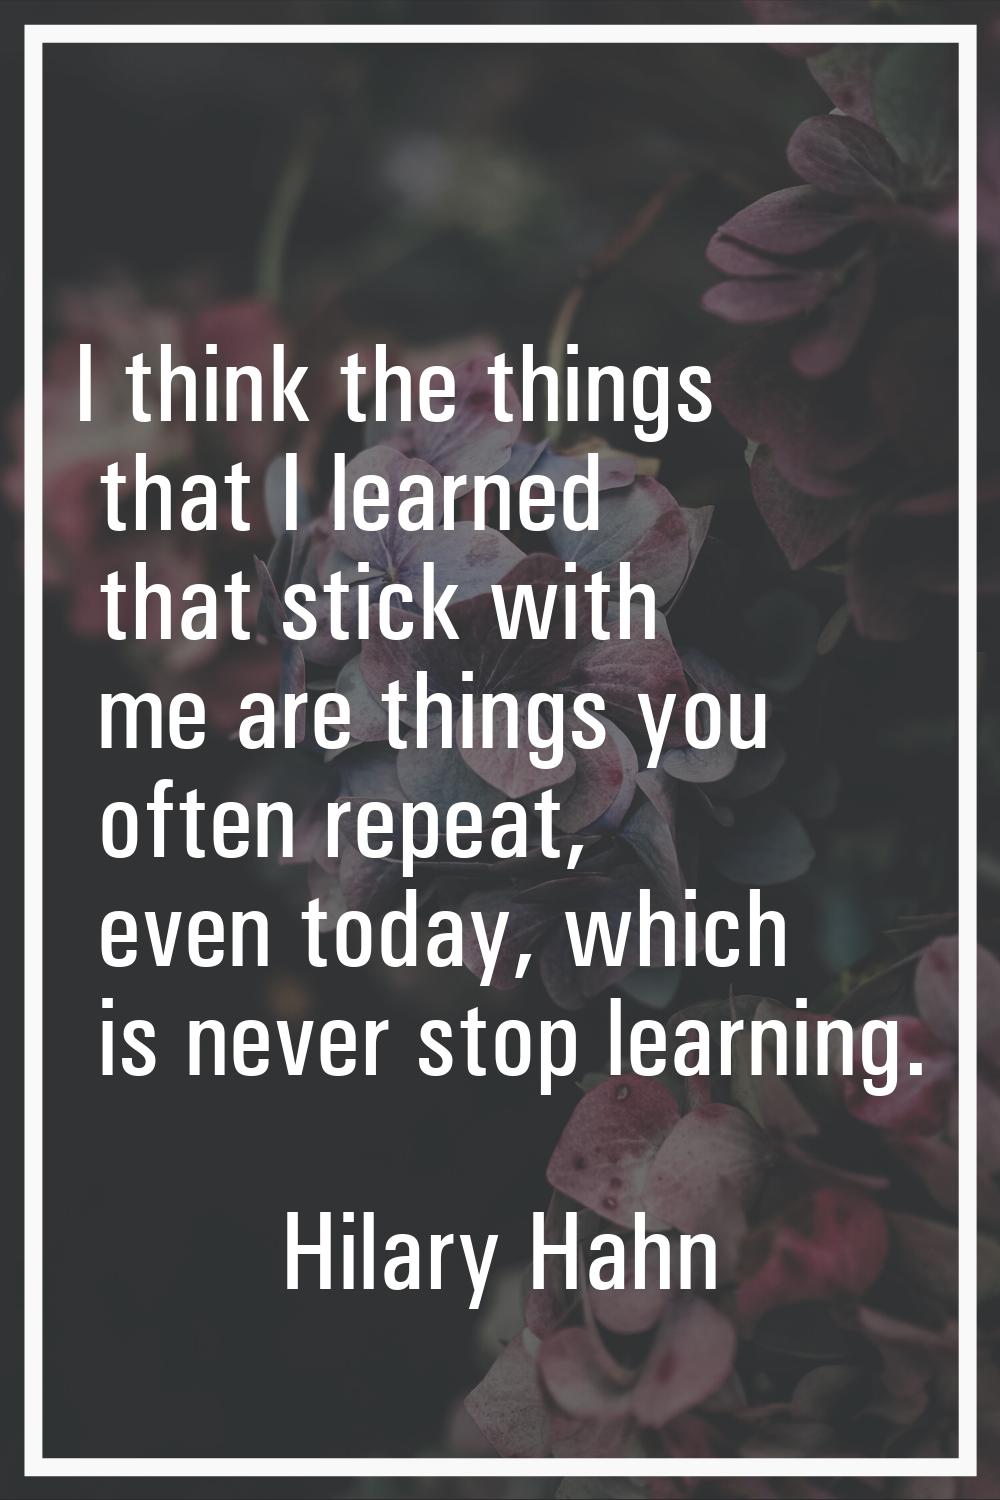 I think the things that I learned that stick with me are things you often repeat, even today, which